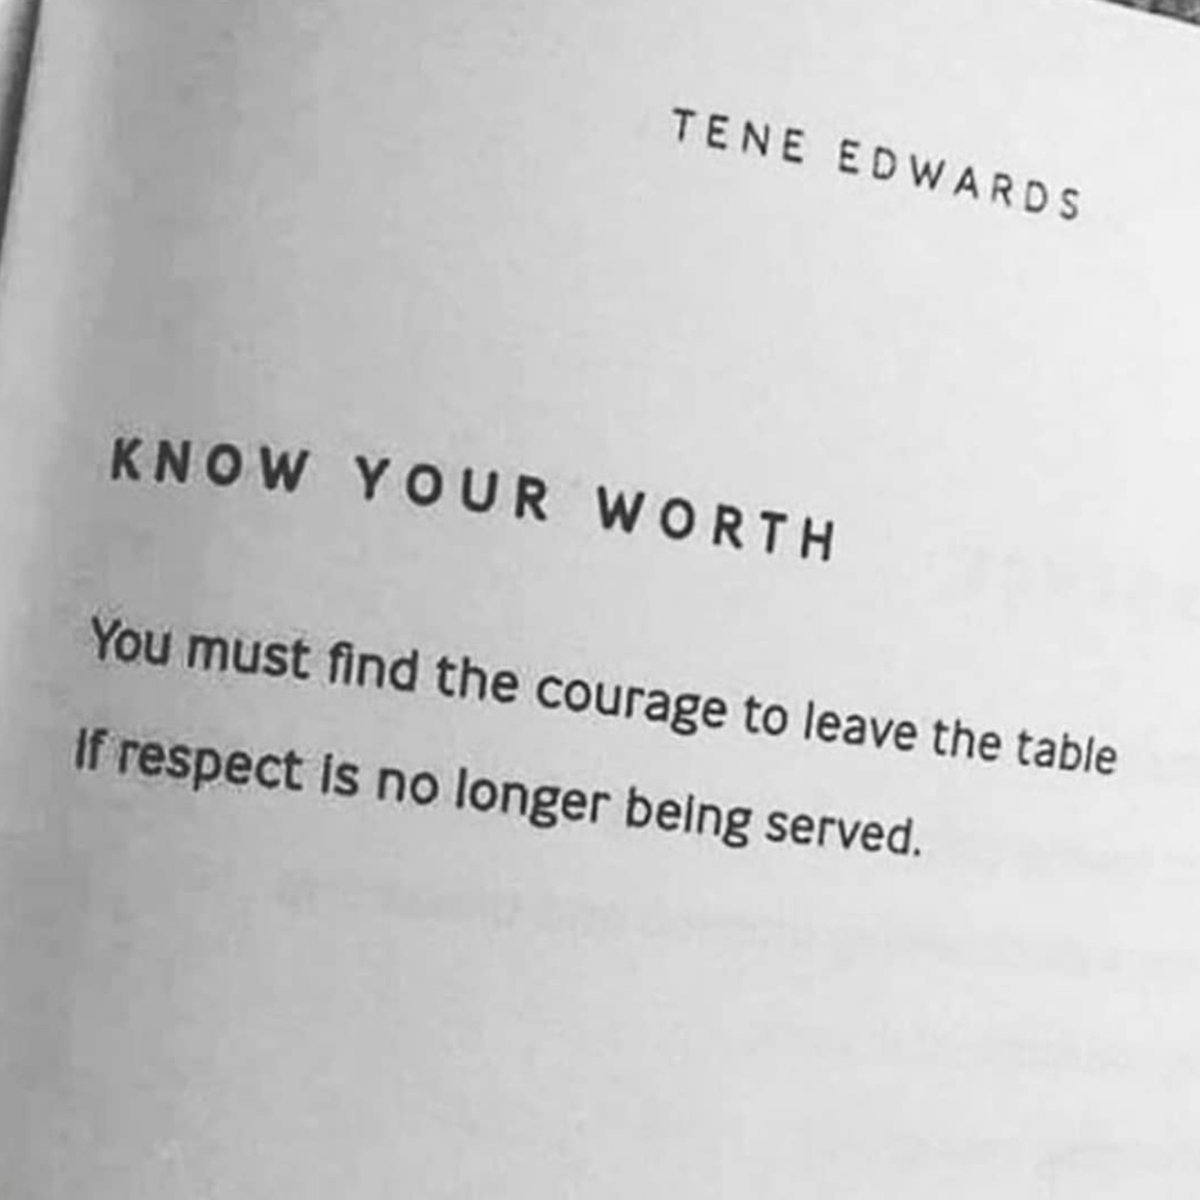 you must find the courage to leave the table if respect is no longer being served, know your worth, ten edwards